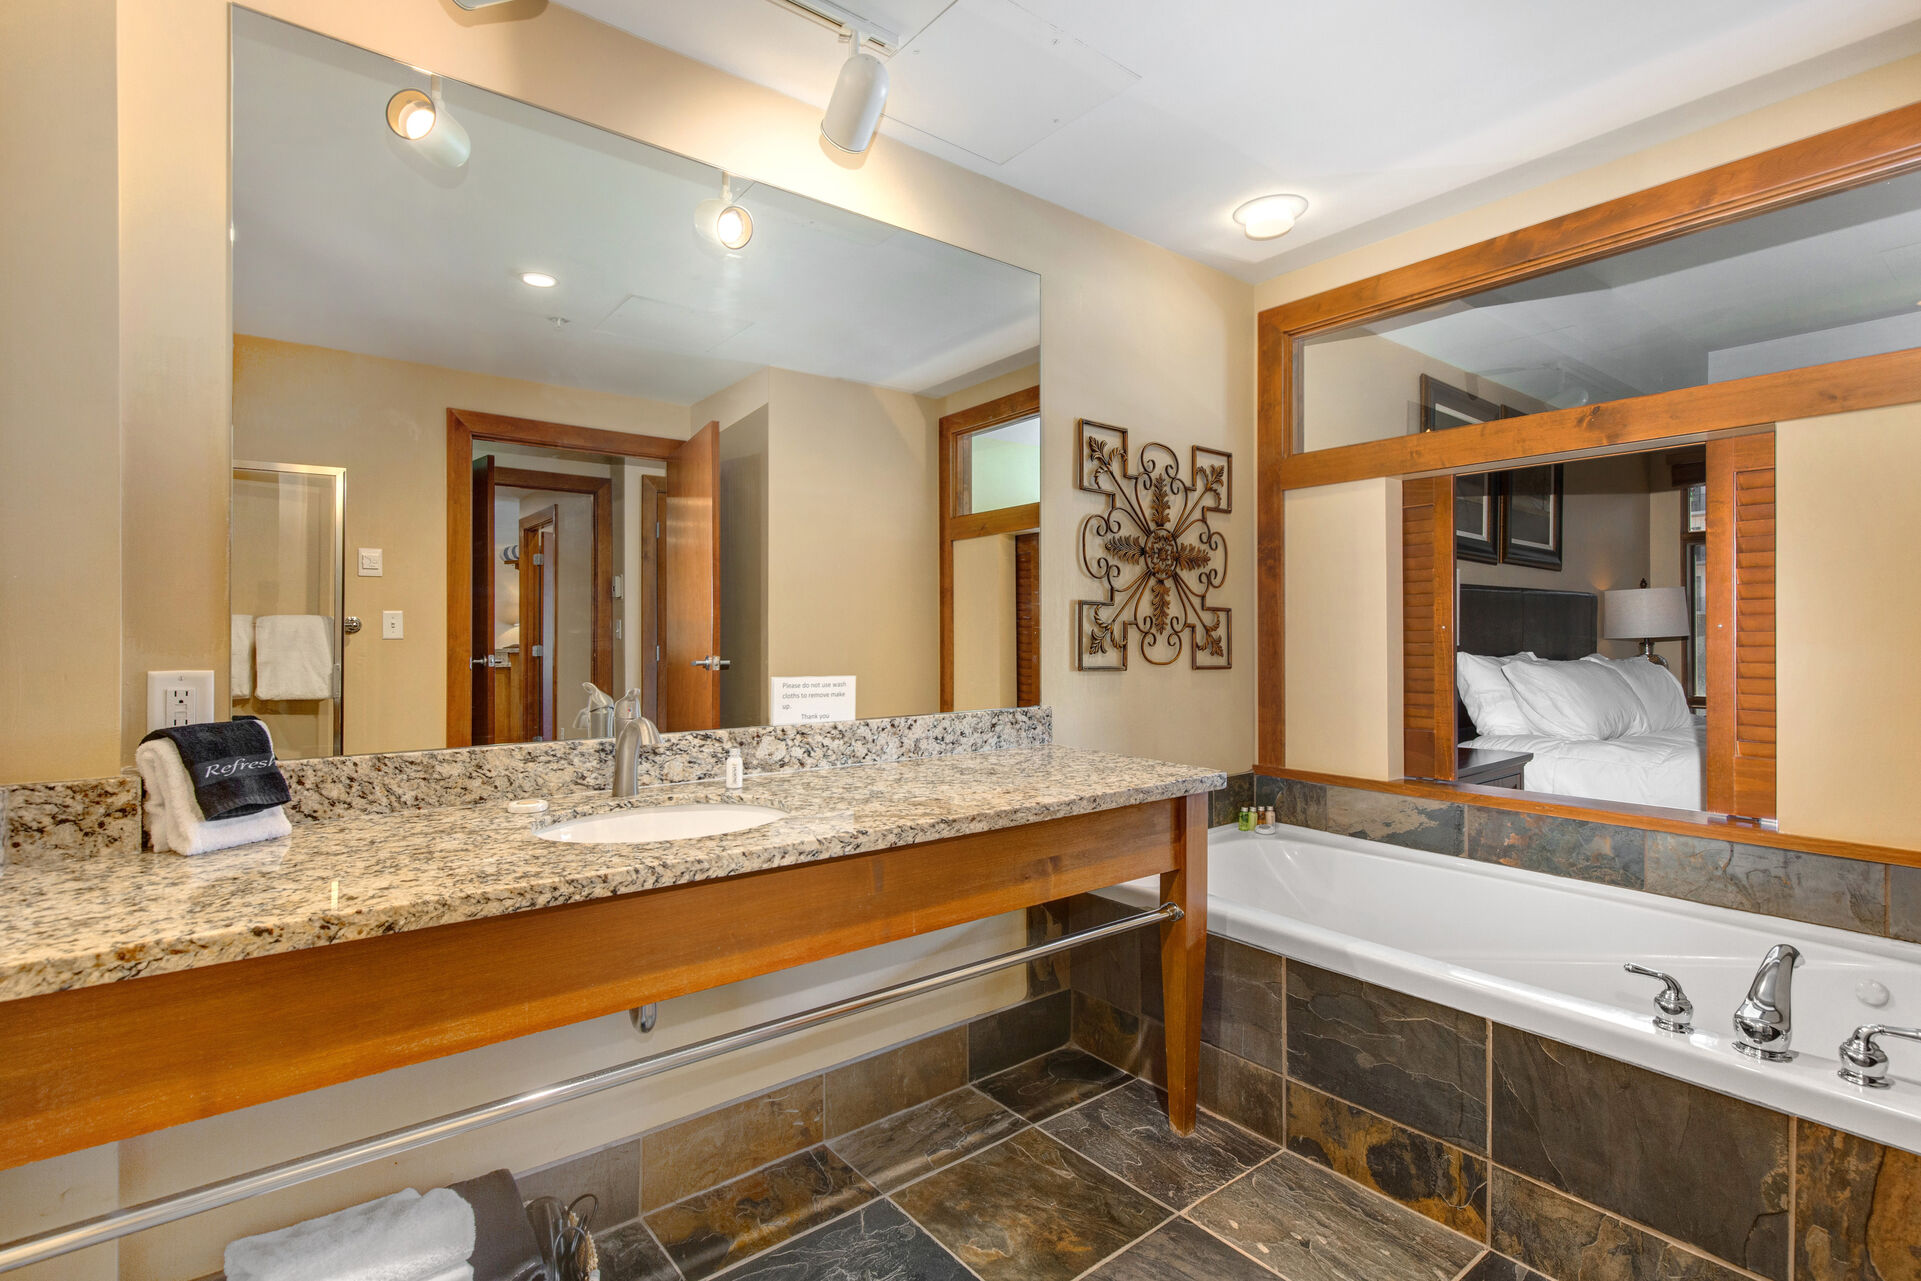 Master Bathroom with oversized vanity, large tiled shower, and jetted tub